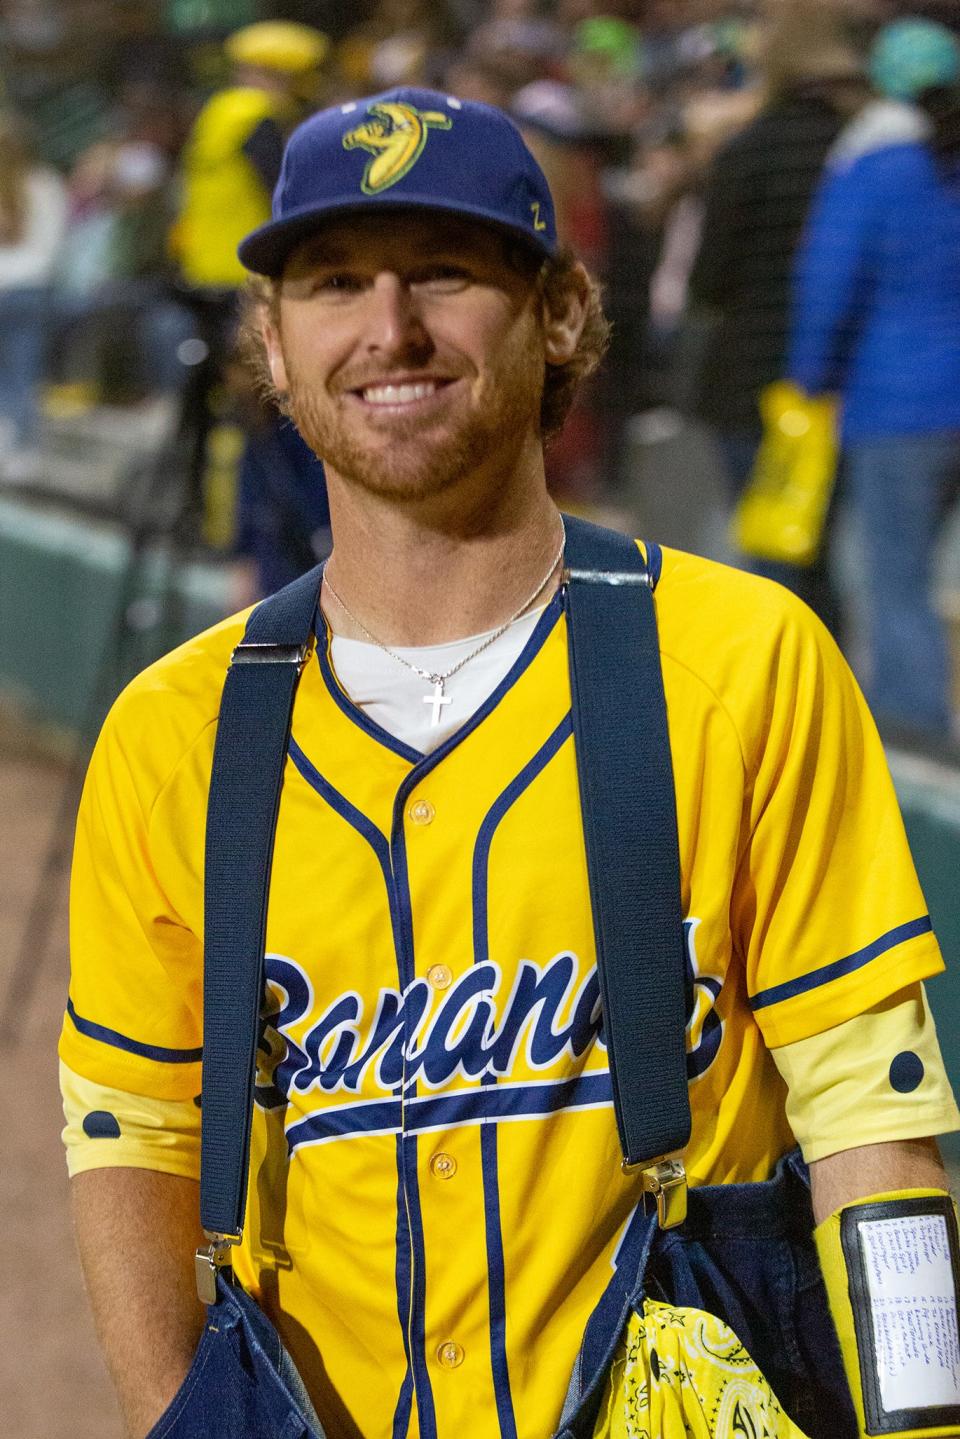 Mat Wolf, 34, of Joy, Oklahoma, is a right-handed pitcher and infielder for the Savannah Bananas Premier Team. He is pictured before the game against the Party Animals on Saturday, March 12, 2022, at Grayson Stadium.